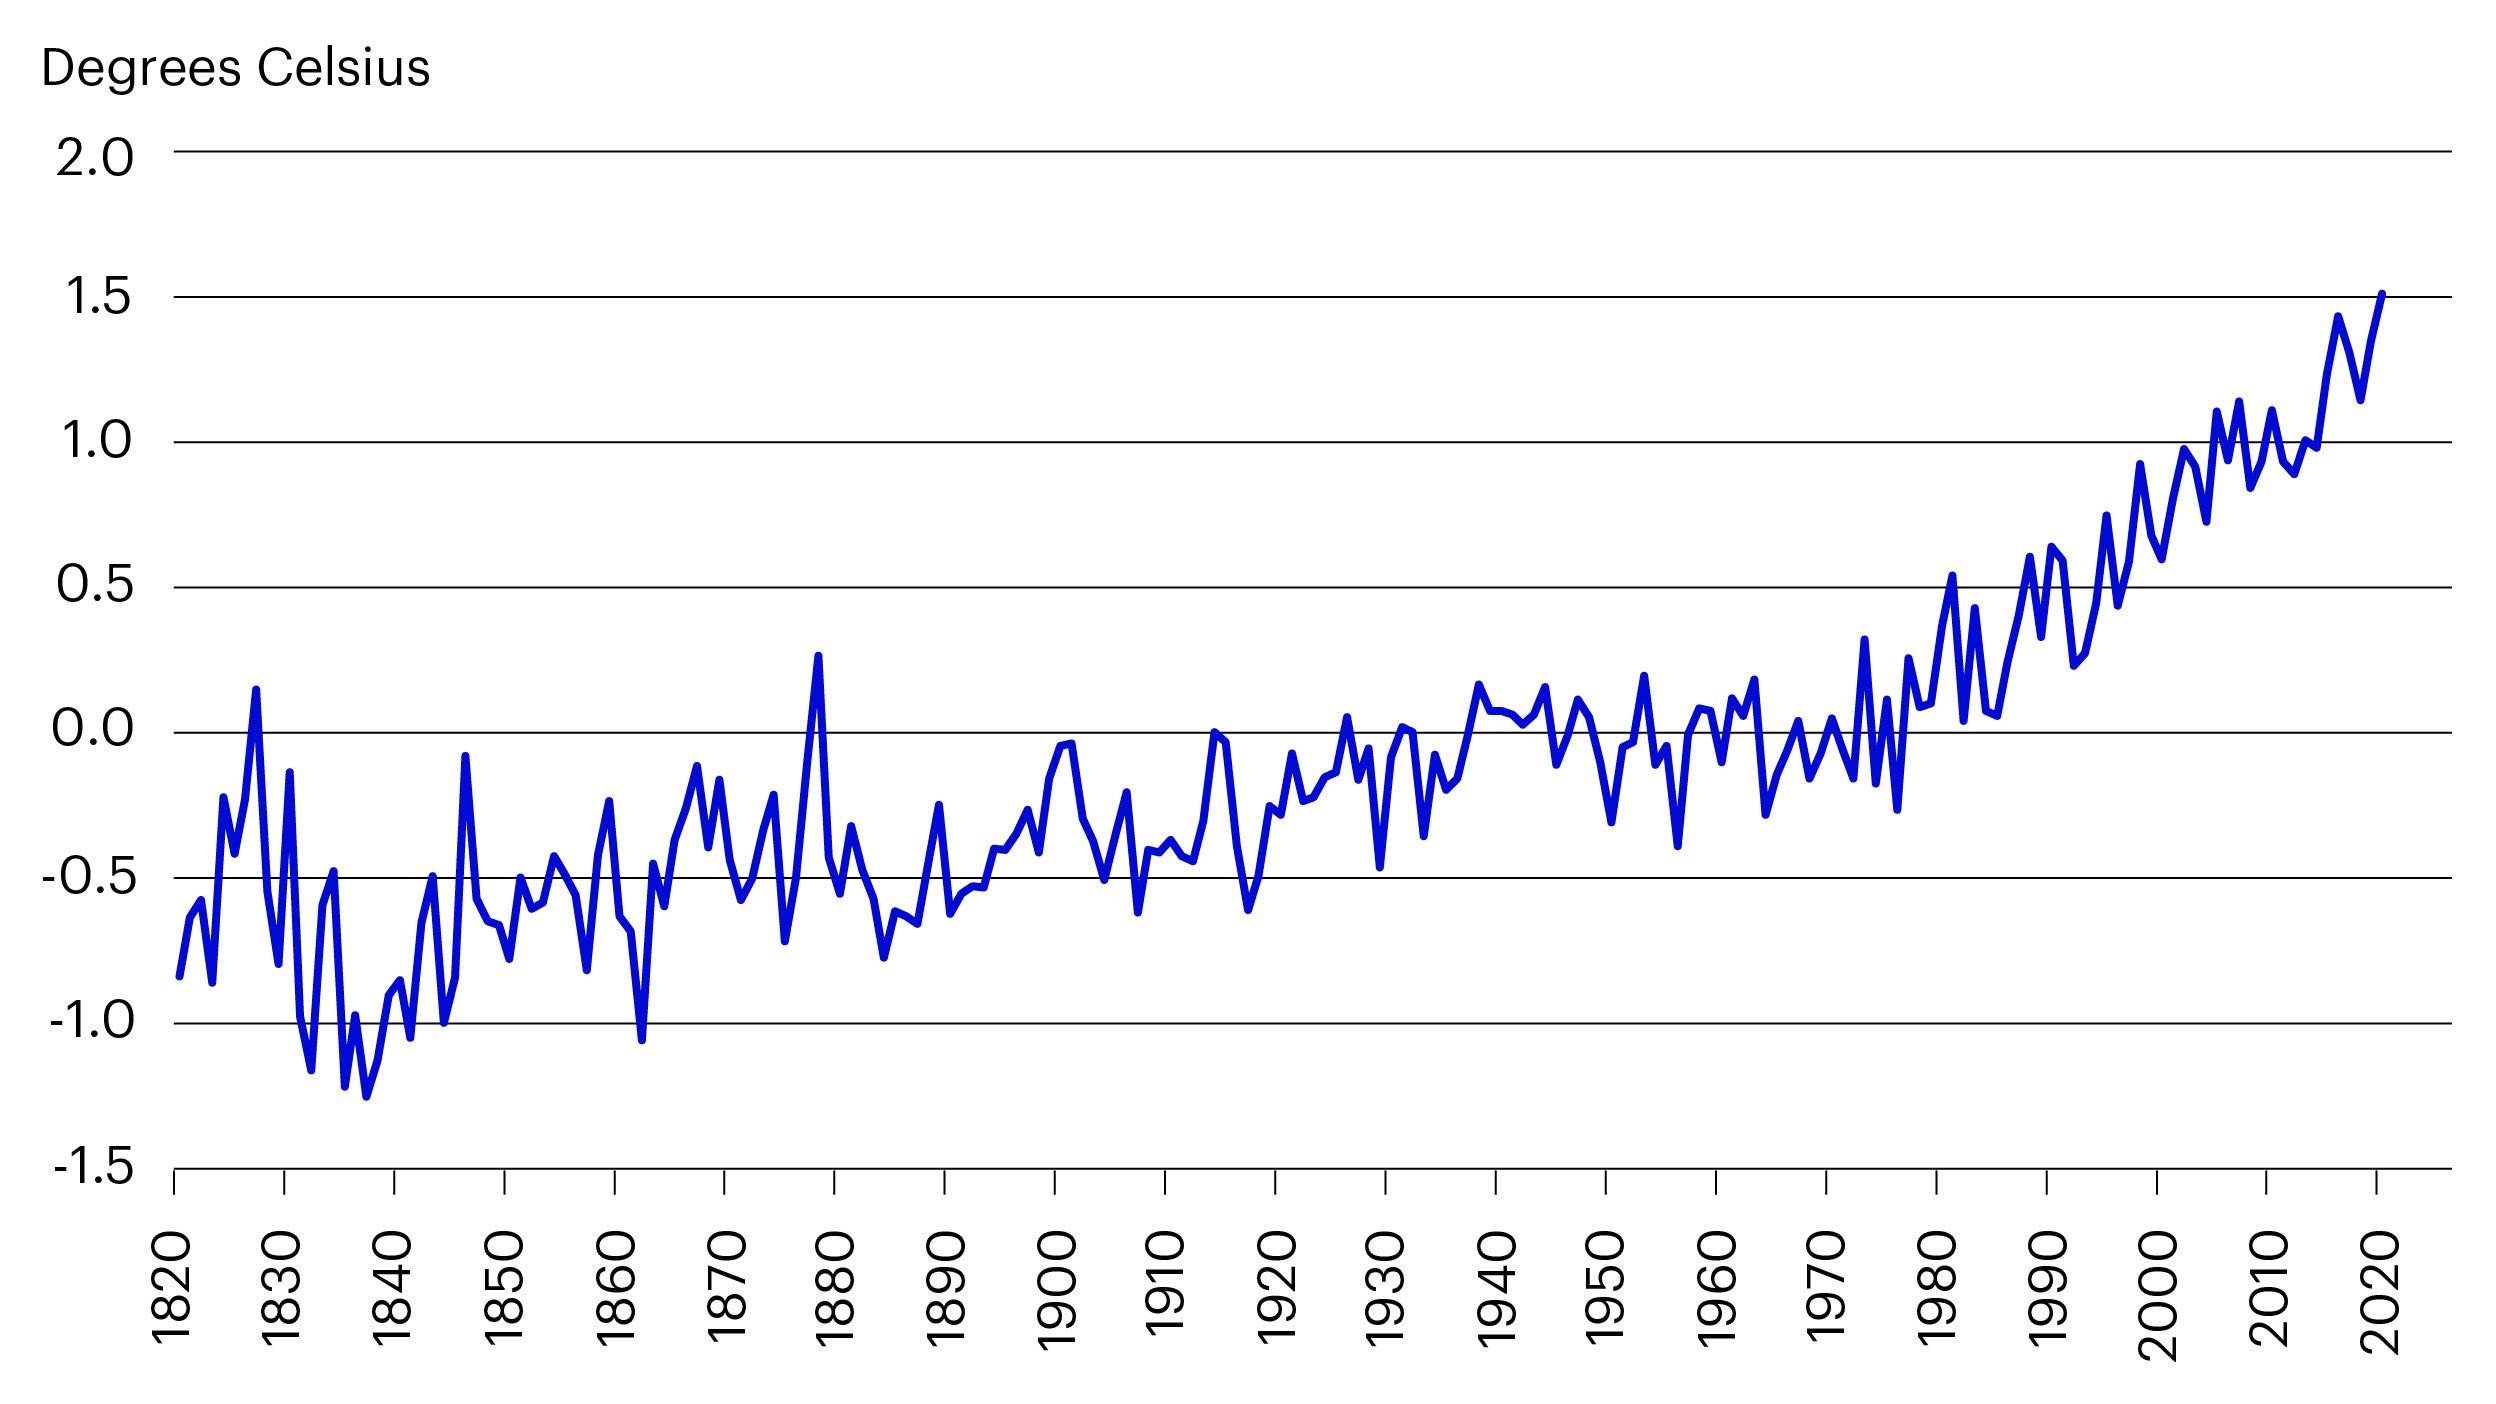 Figure 1: Annual global temperature anomalies since 1820